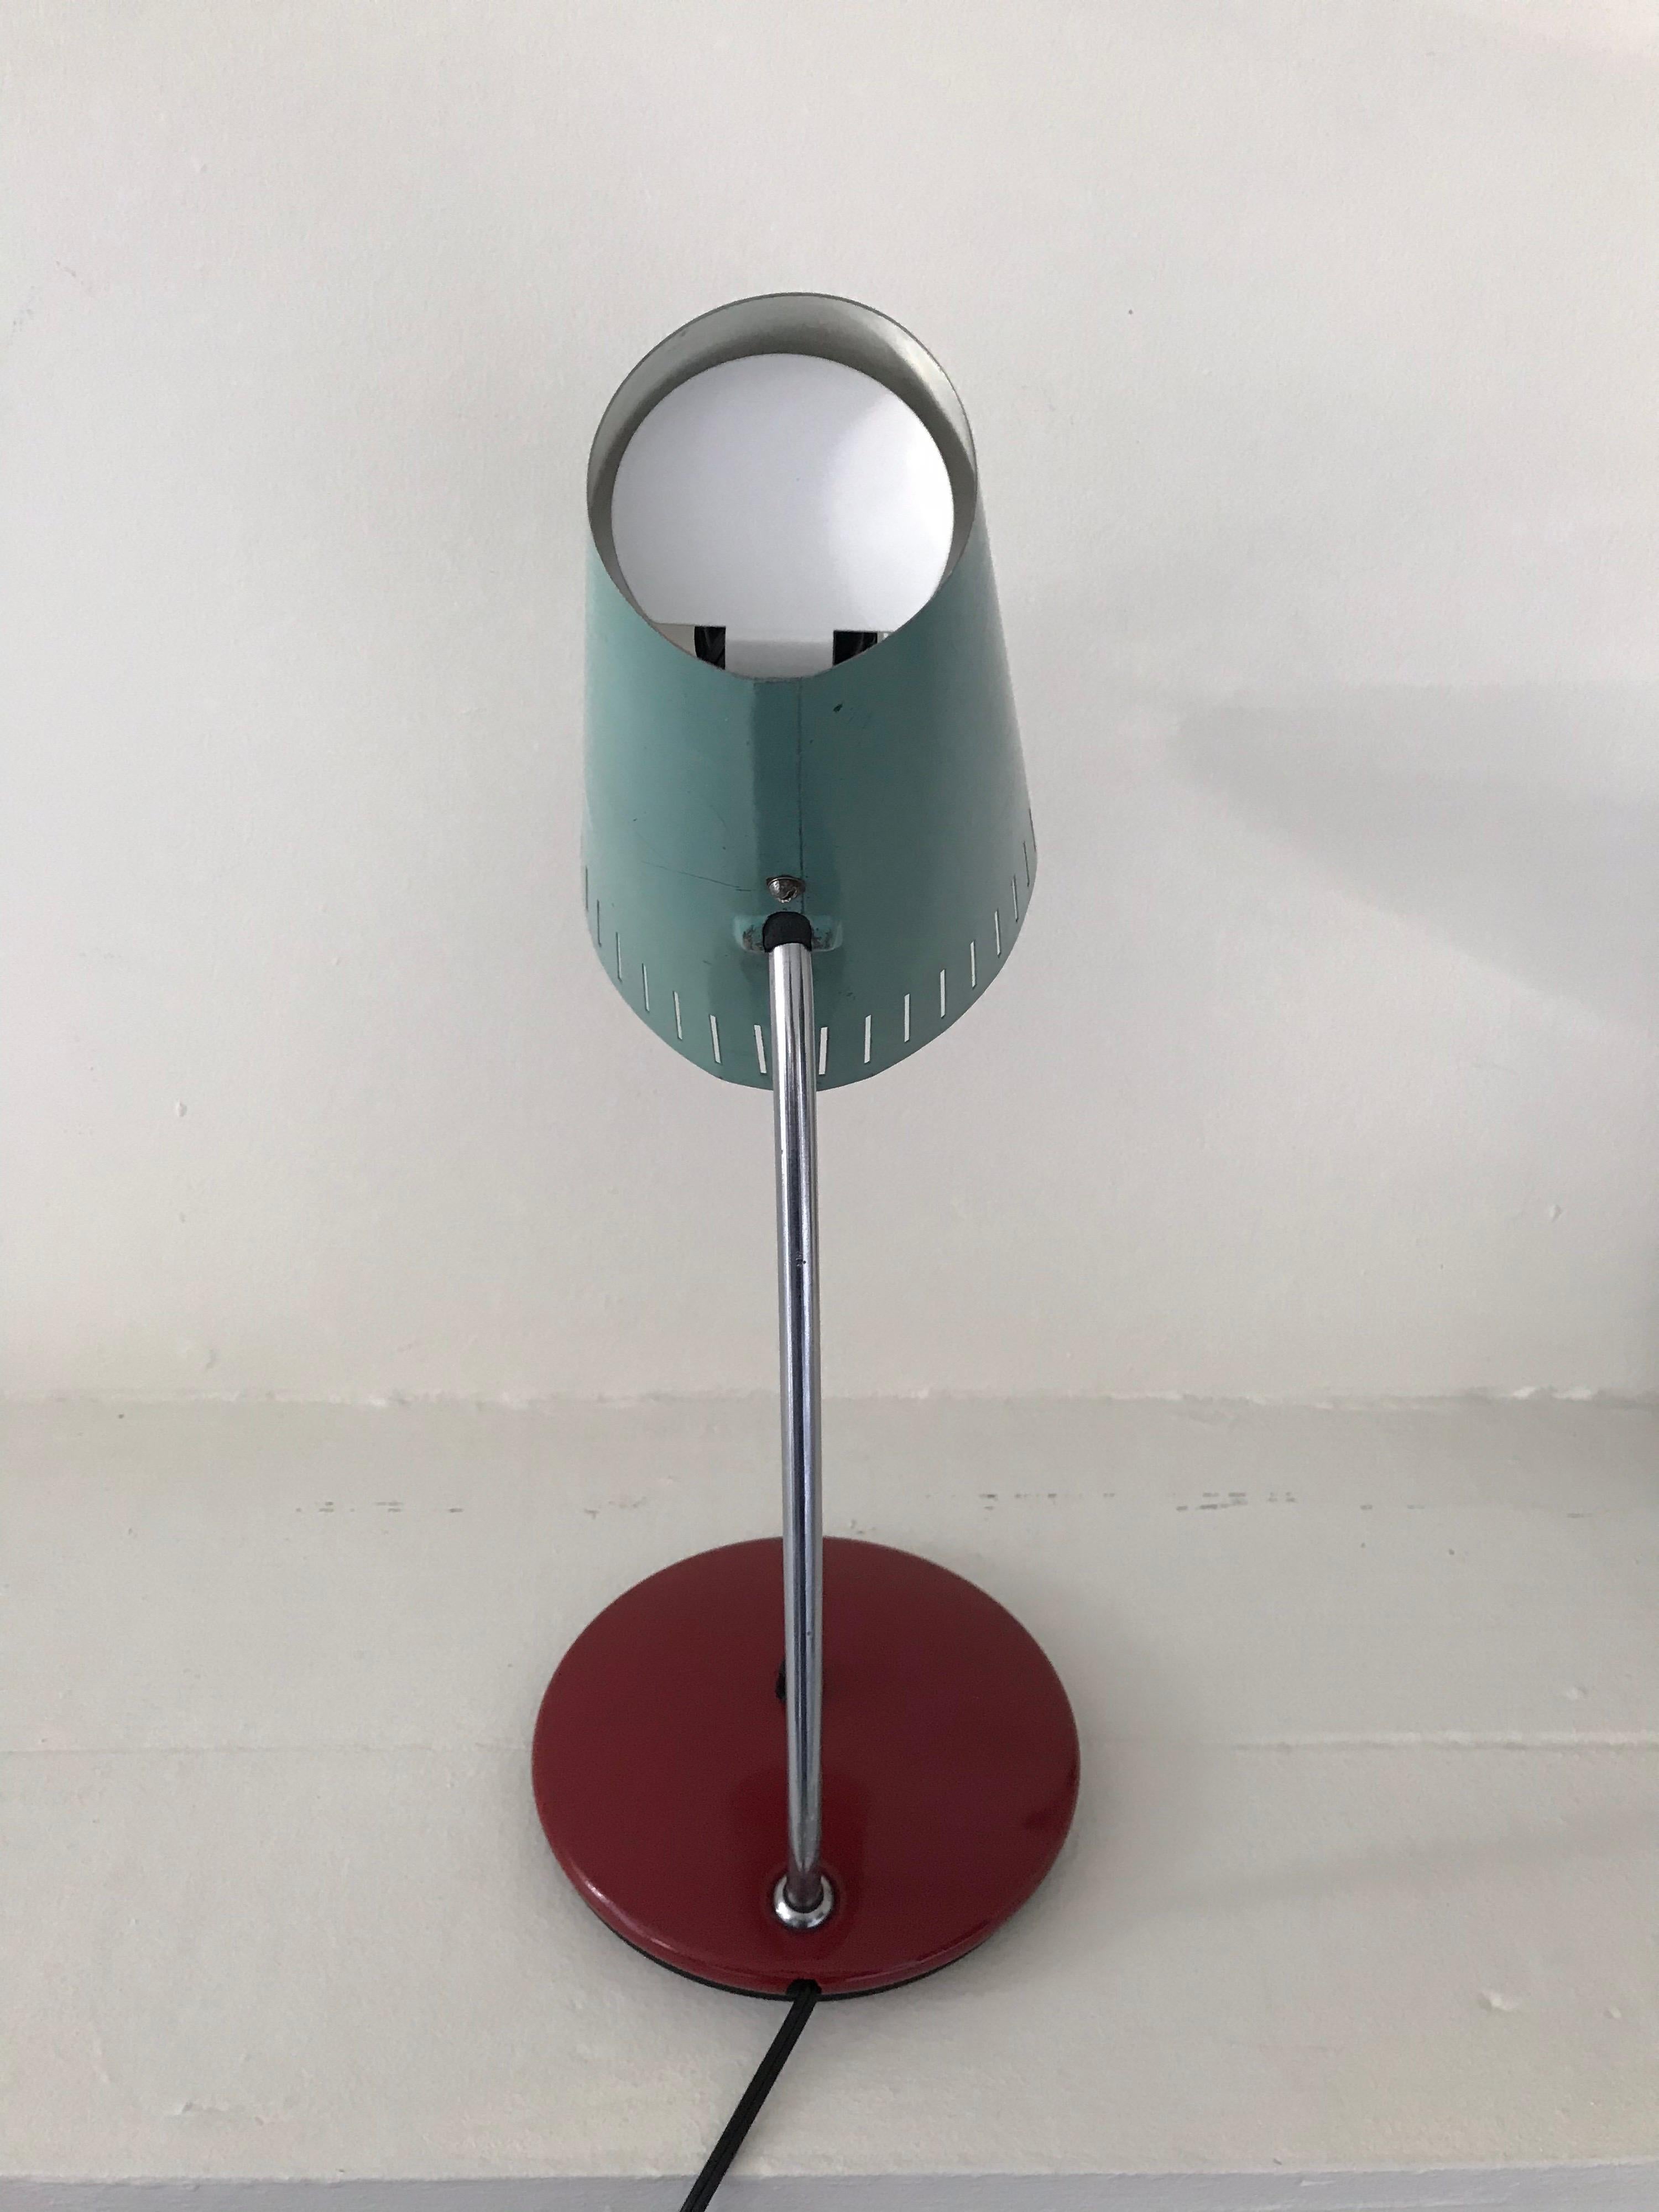 Very cool Mid-Century Modern desk lamp made in Russia, 1966. Professionally restored and rewired to American standards.